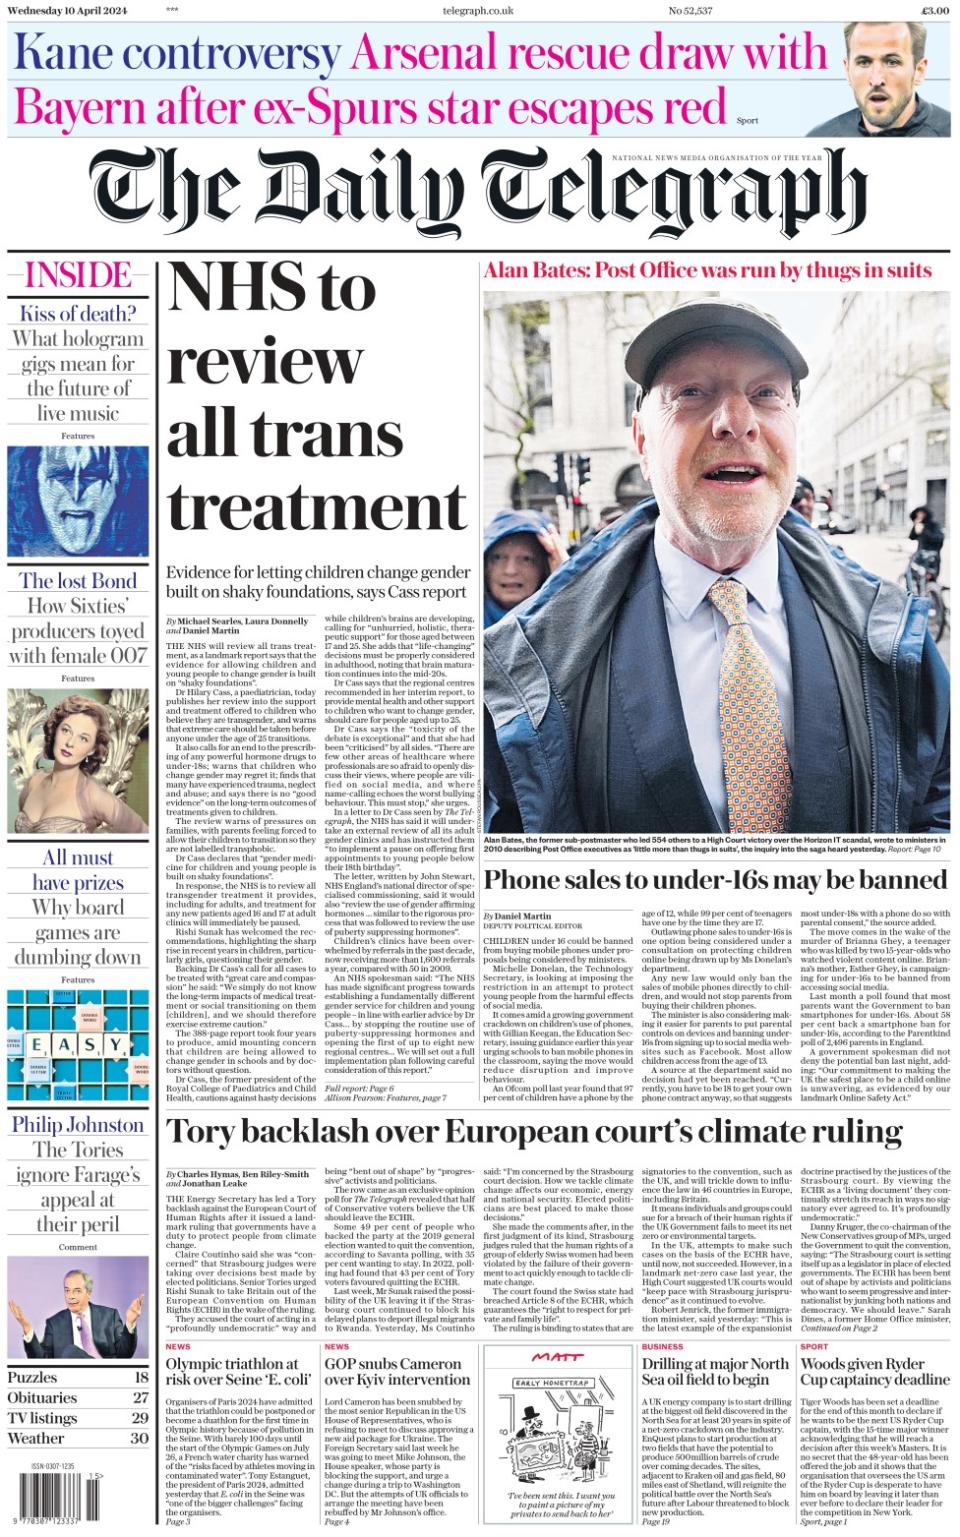 The headline in the Daily Telegraph reads: NHS to review all trans treatment